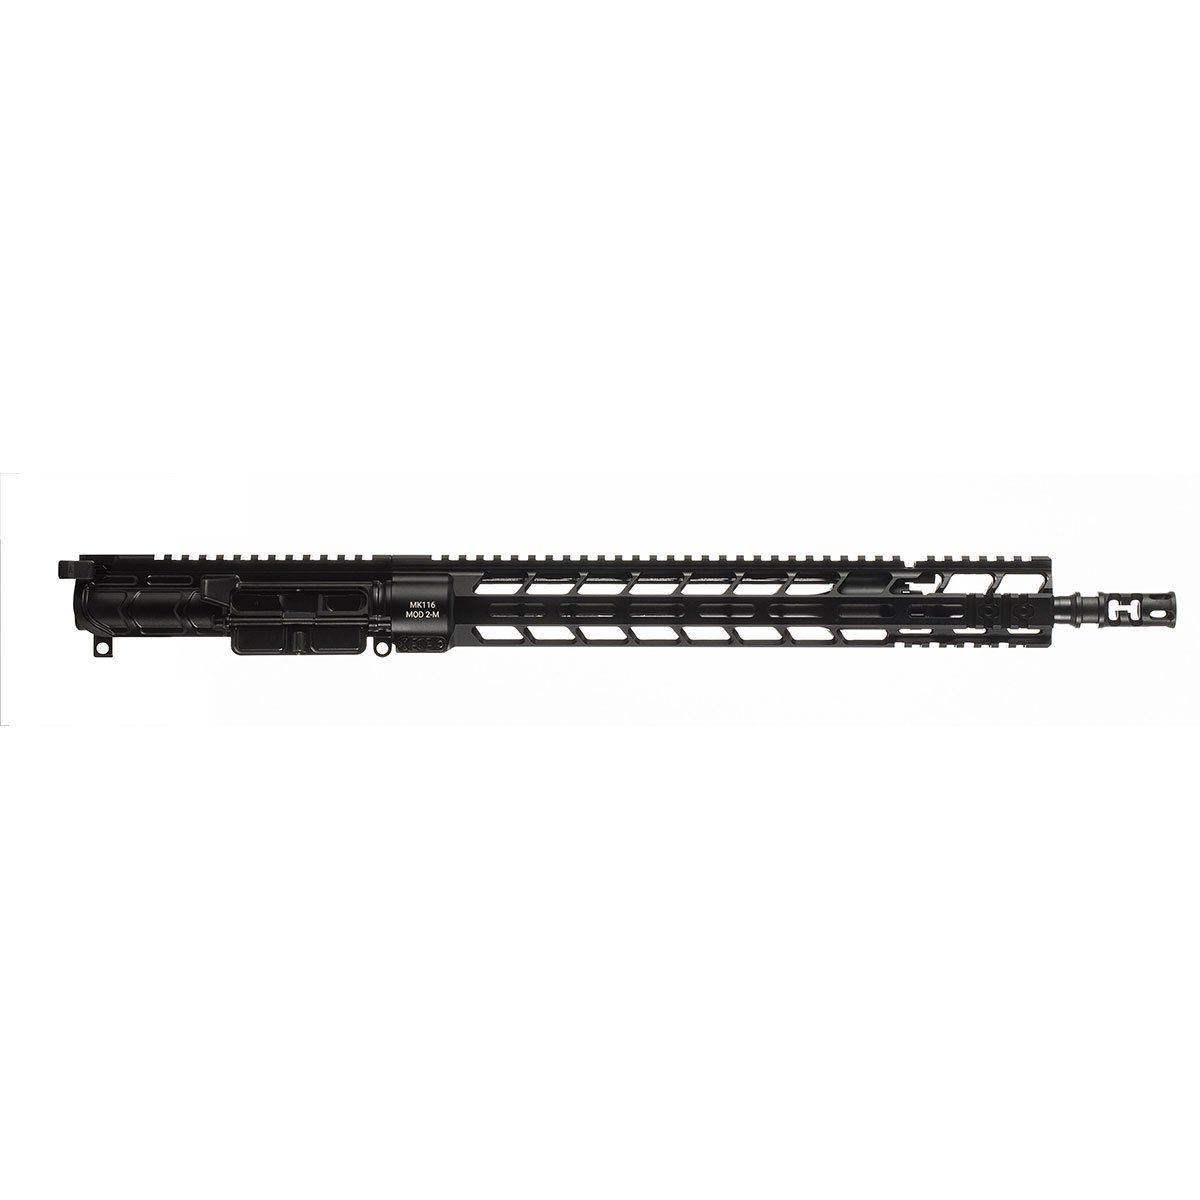 PRIMARY WEAPONS - MK116 MOD 2-M 223 WYLDE COMPLETE UPPER RECEIVER